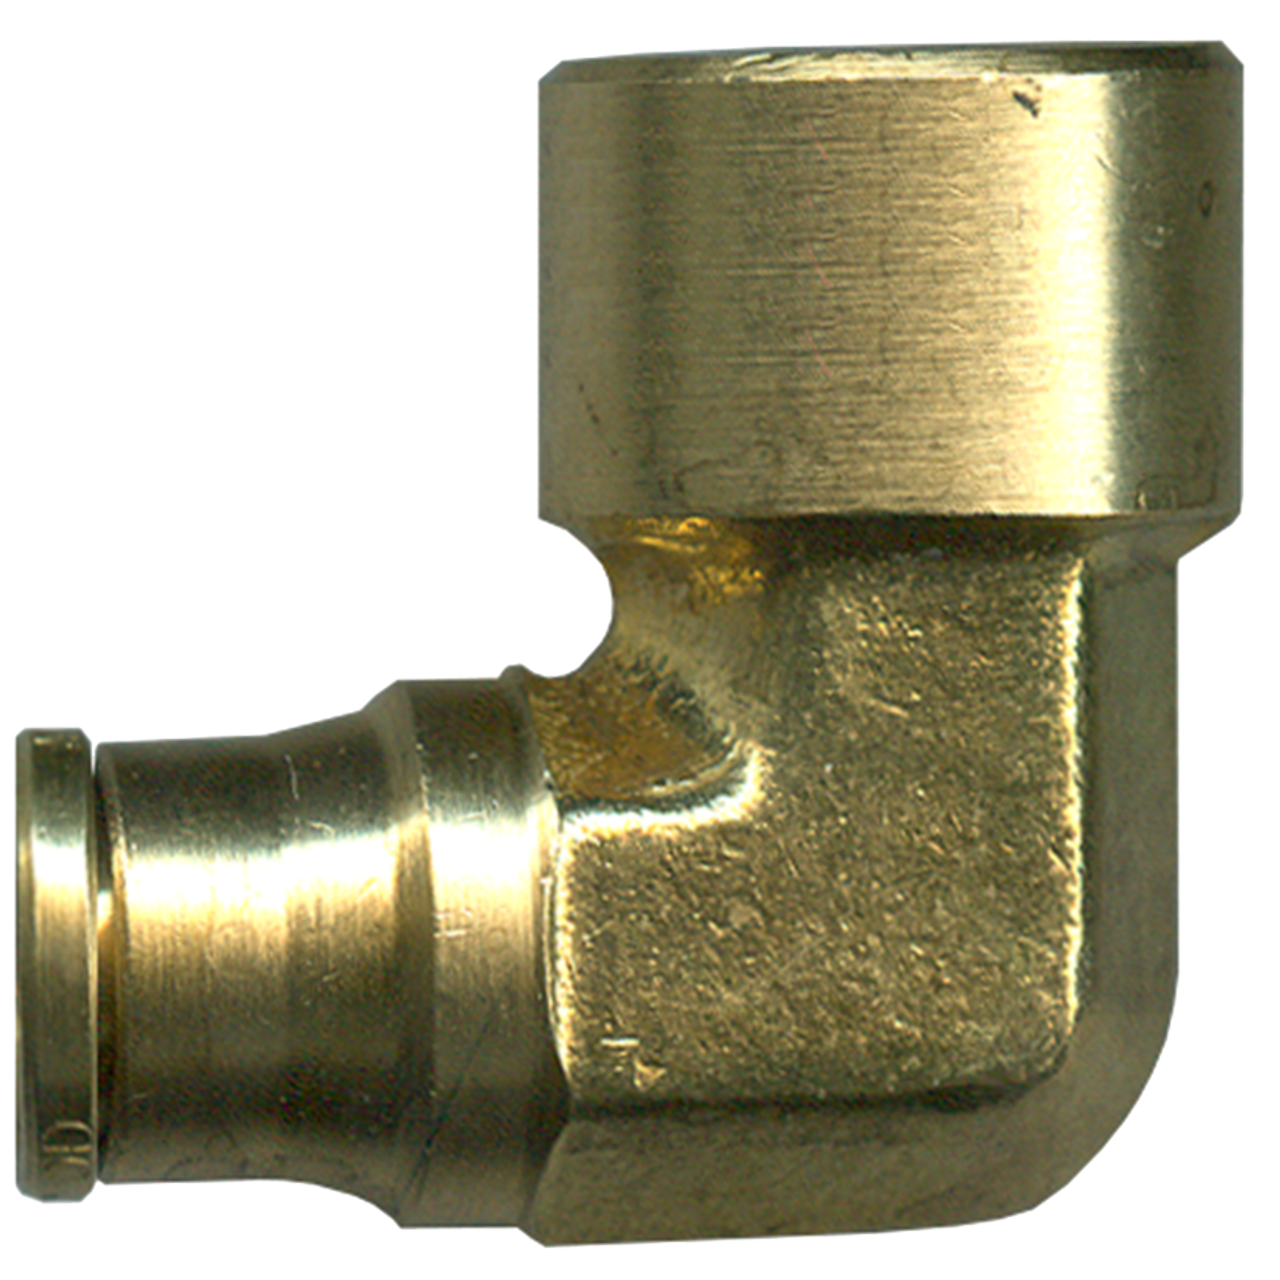 1/8 x 1/16" Brass Push-To-Connect - Female NPT 90° Elbow  PC70-2-1/2A